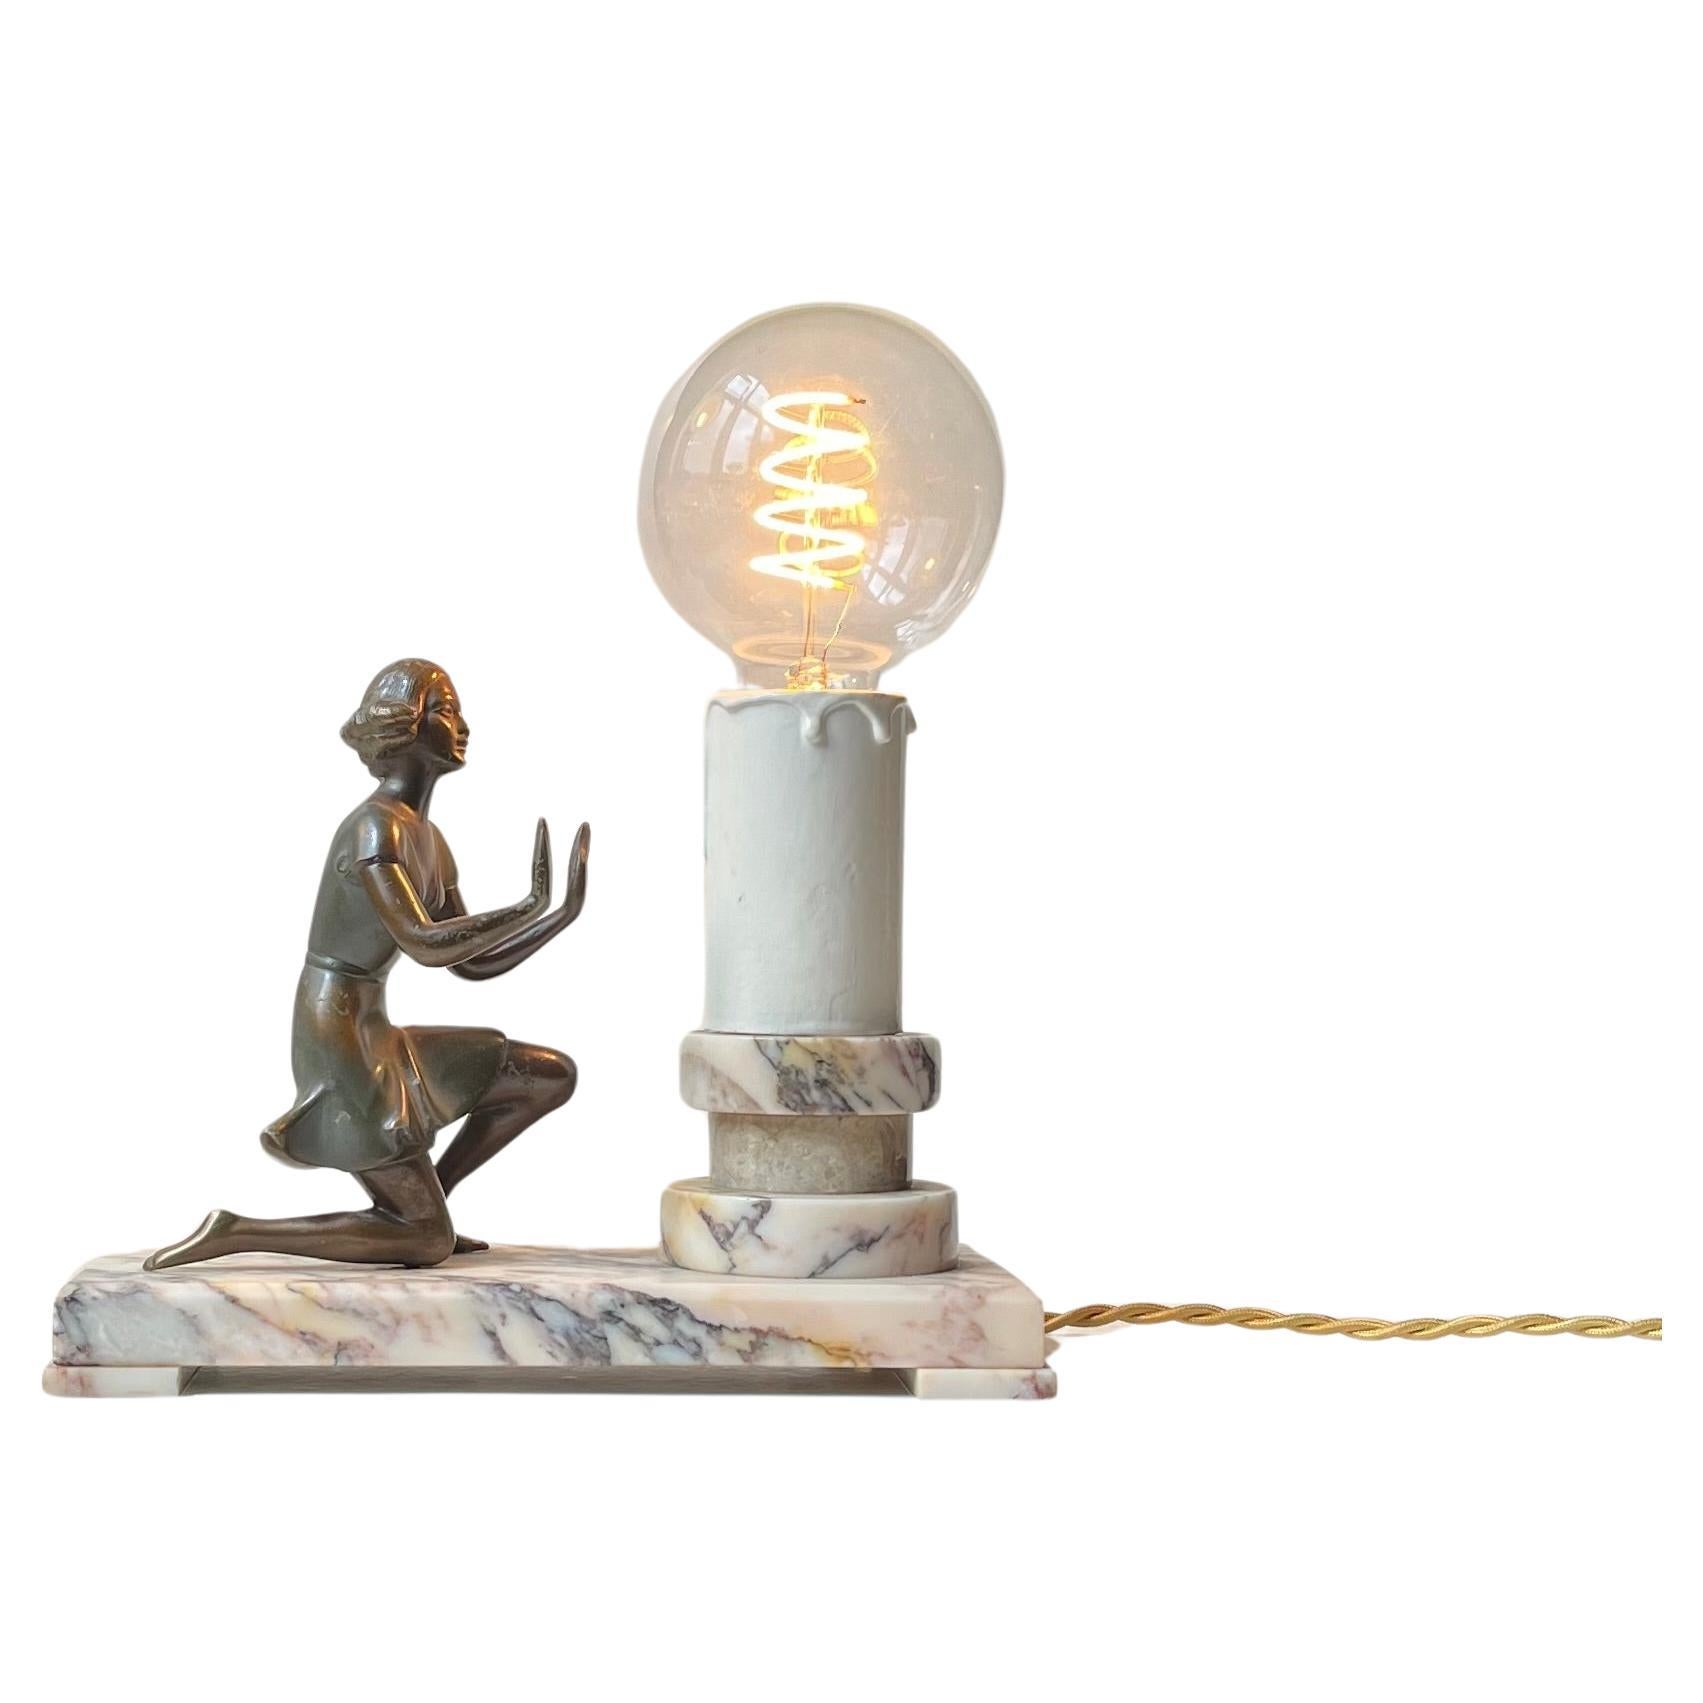 Figural French Art Deco Table Lamp in Bronze & Marble, 1930s For Sale